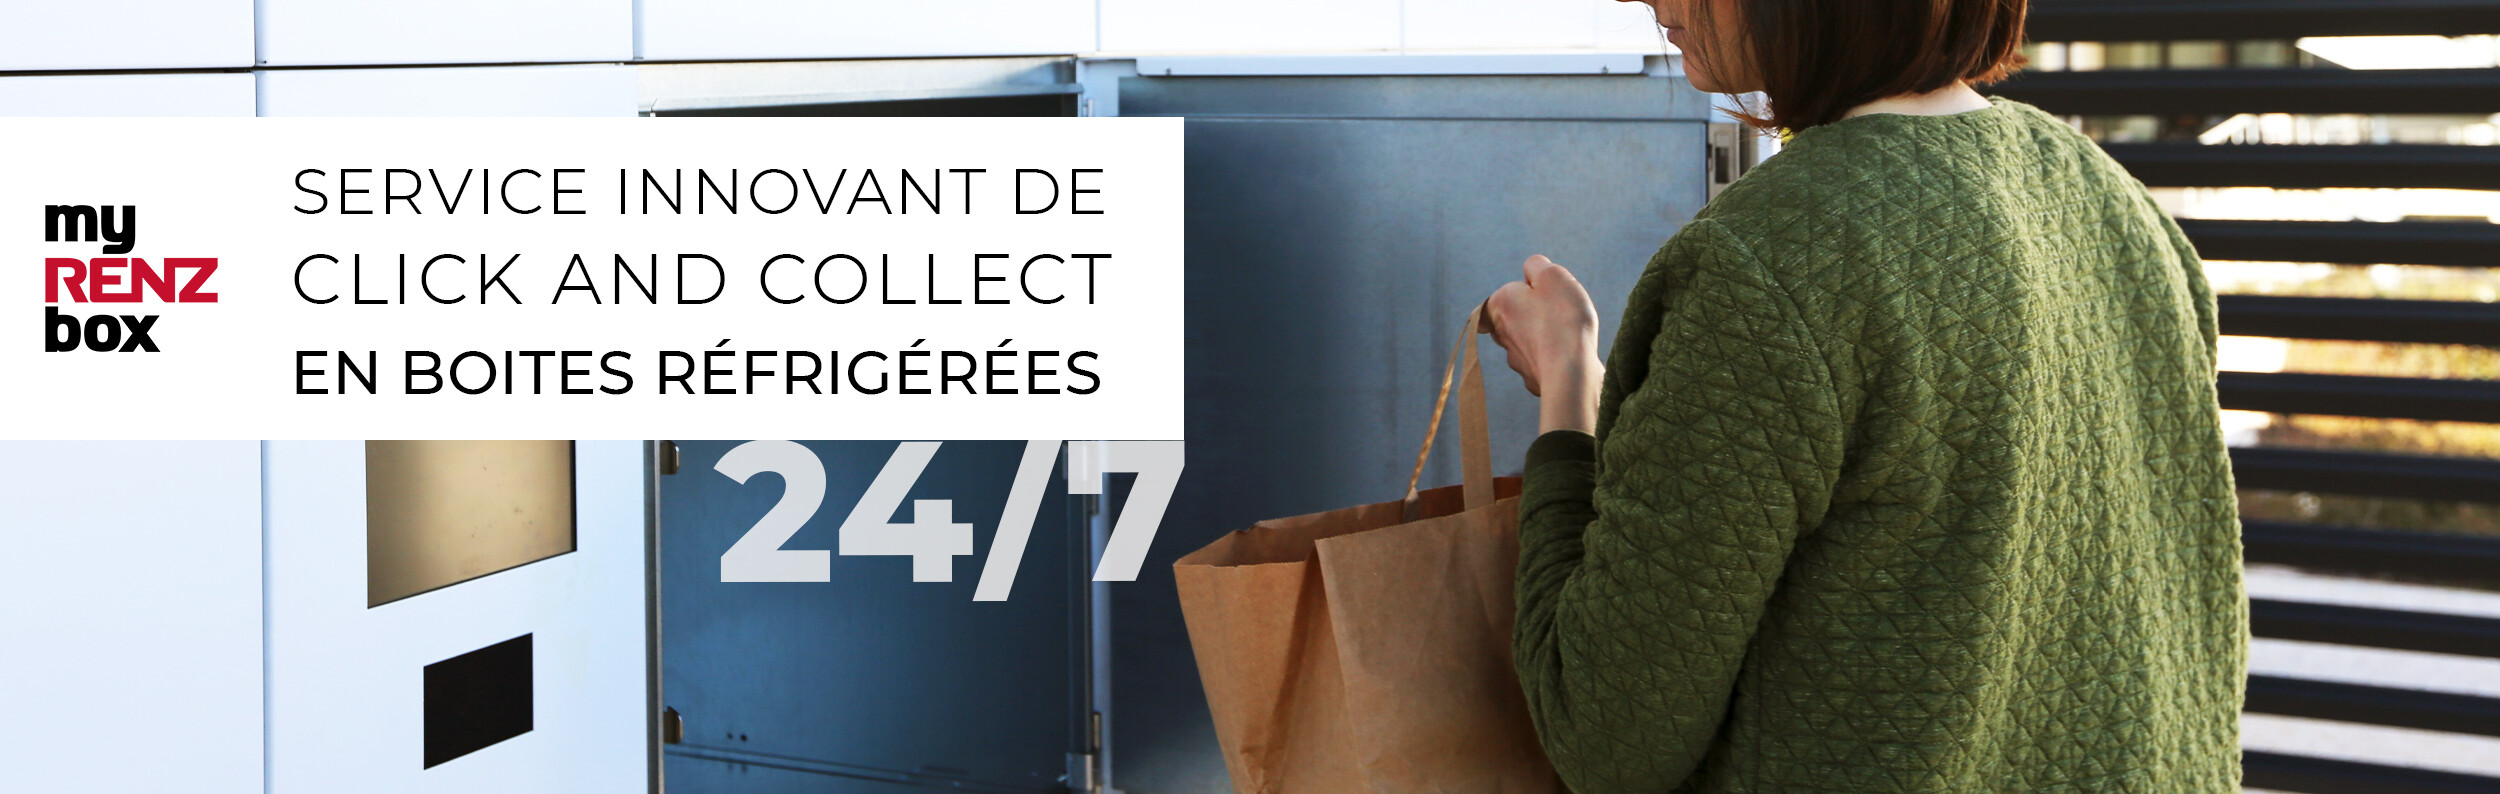 myRENZbox click and collect alimentaire 